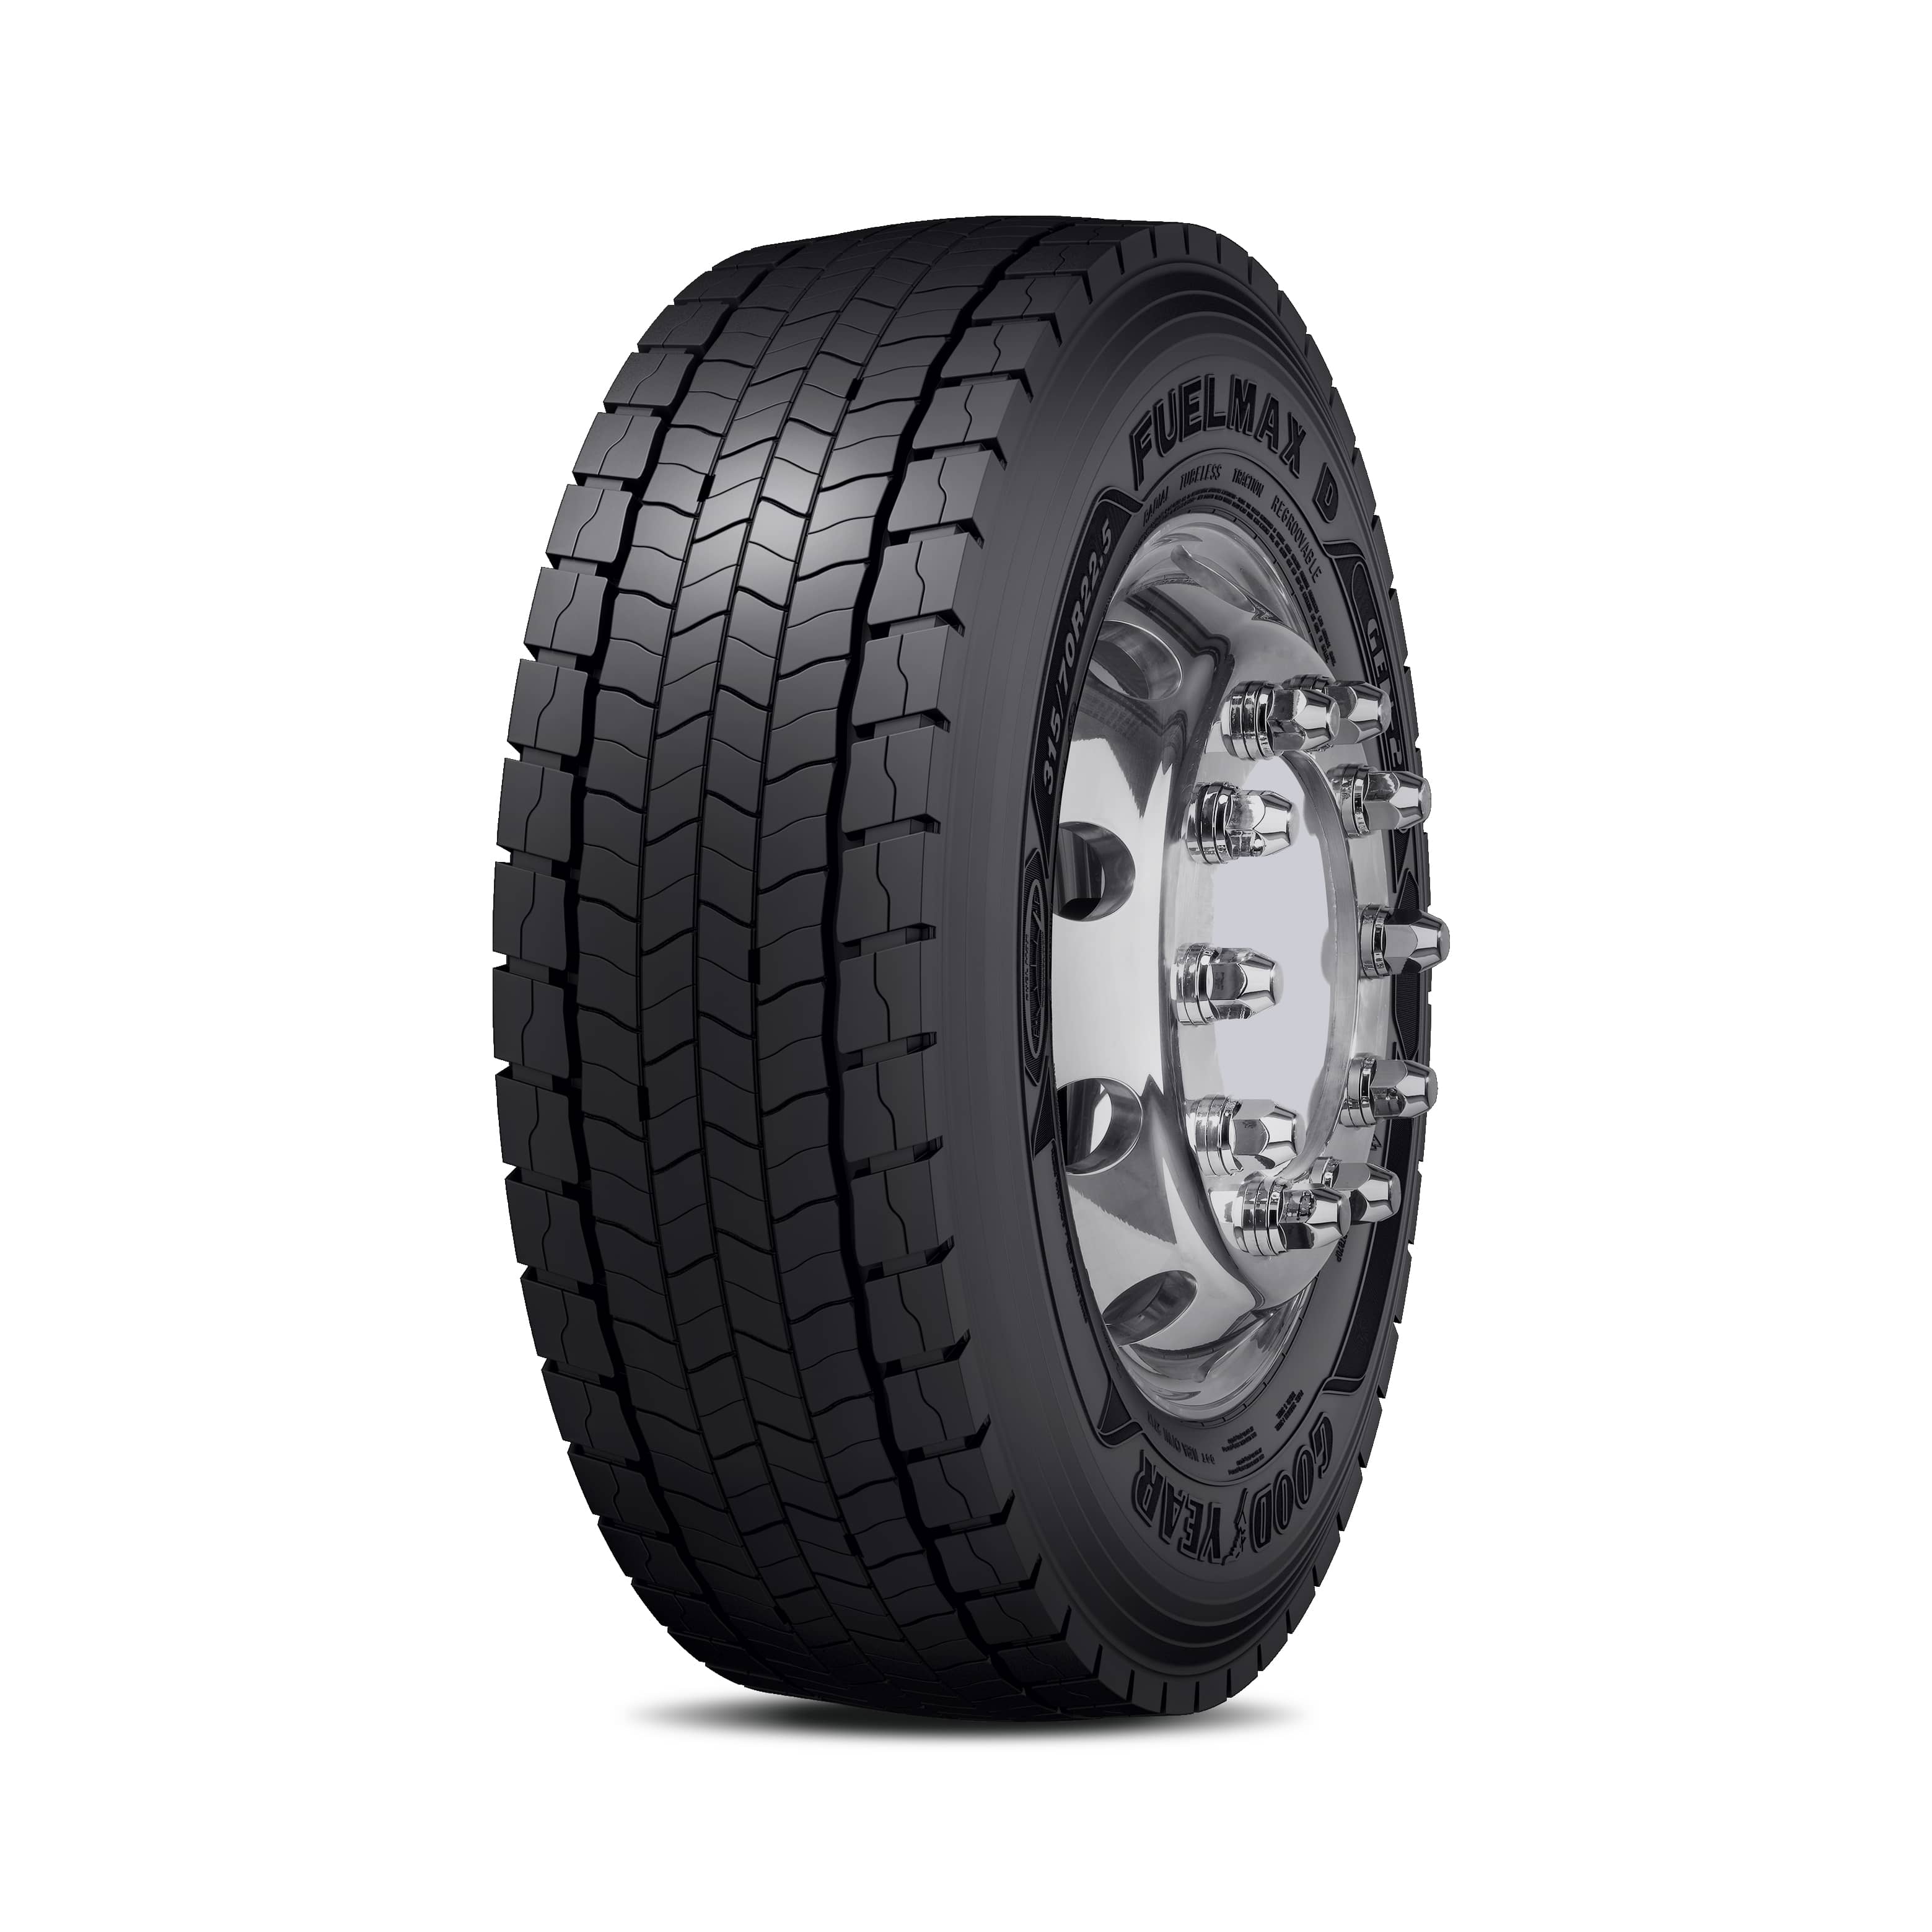 anvelope de camion, anvelope Goodyear